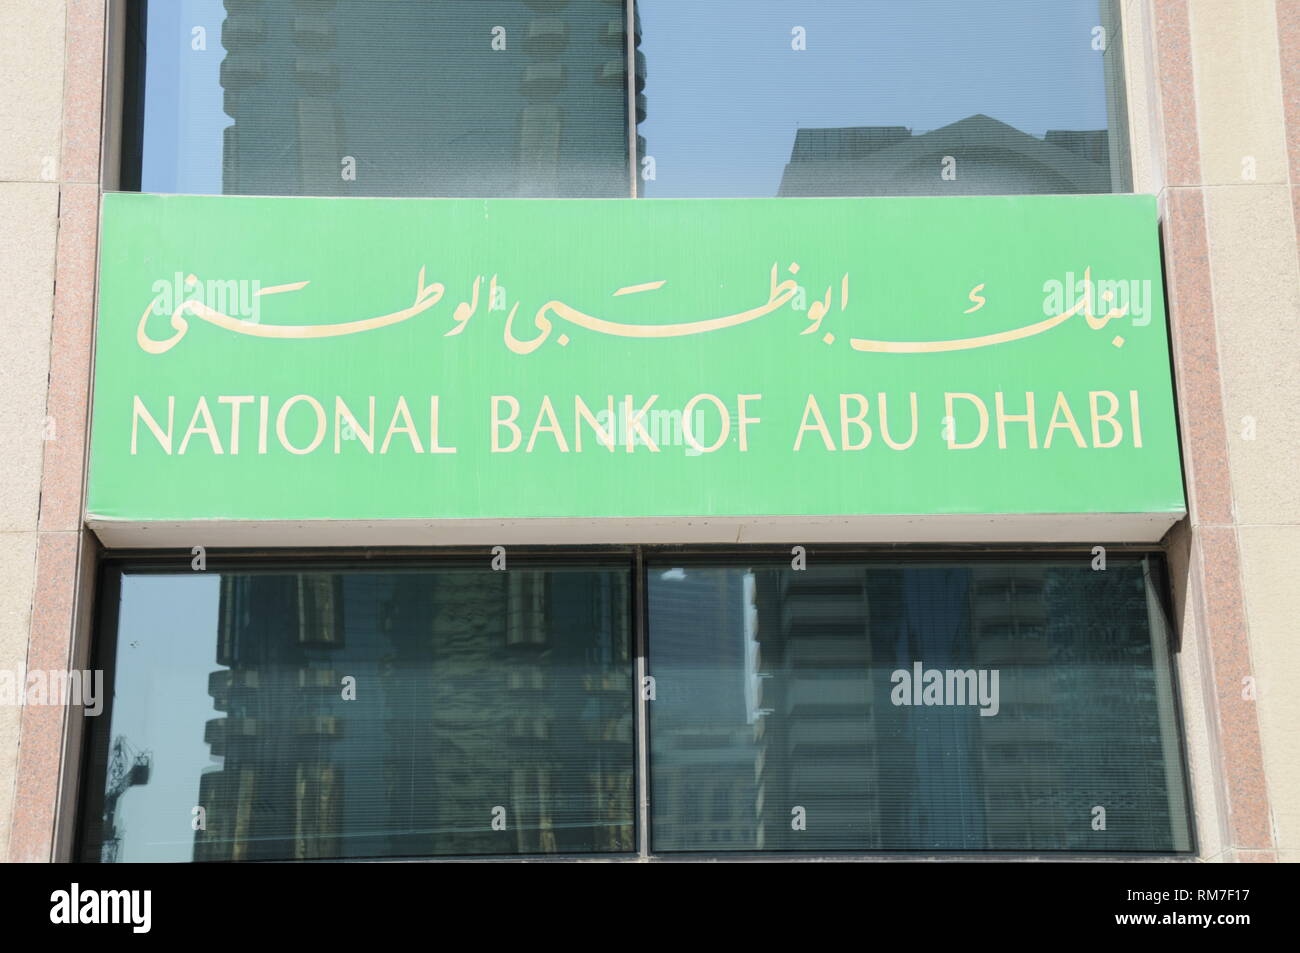 List Of National Bank Of Fujairah Branches And Atms In Uae Dubai Ofw